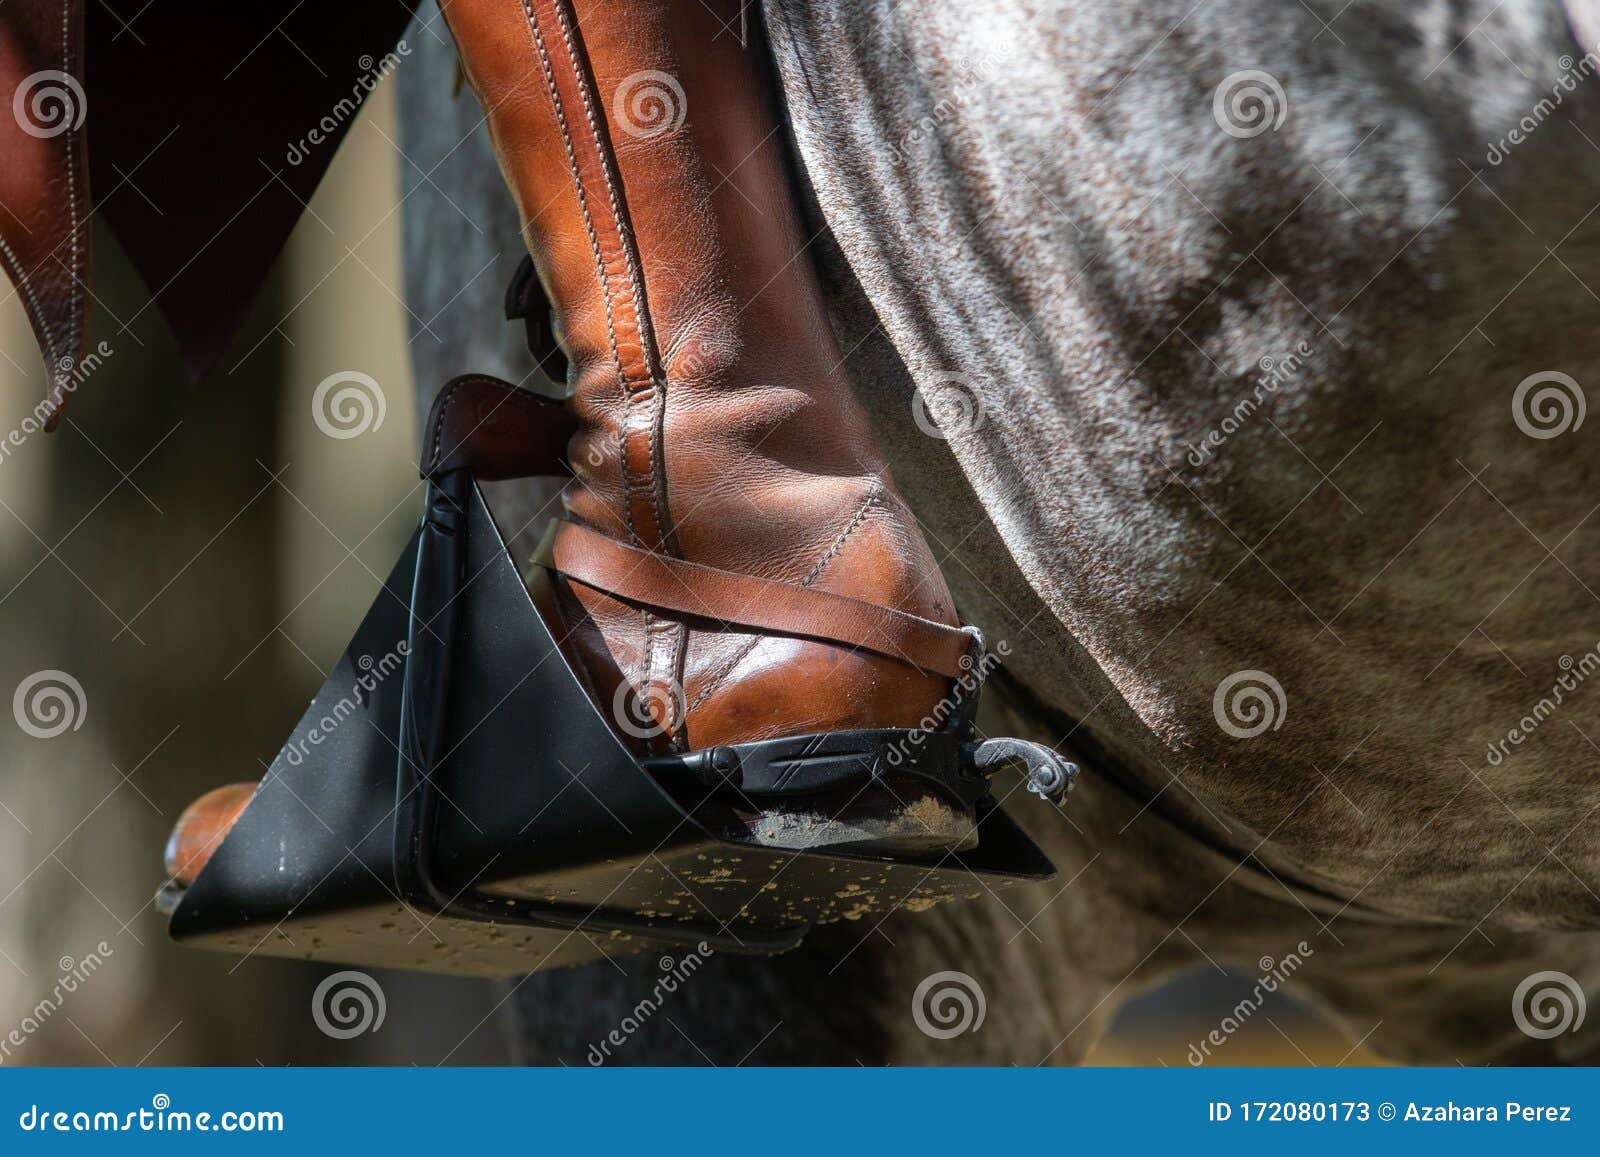 spanish boot and stirrup detail